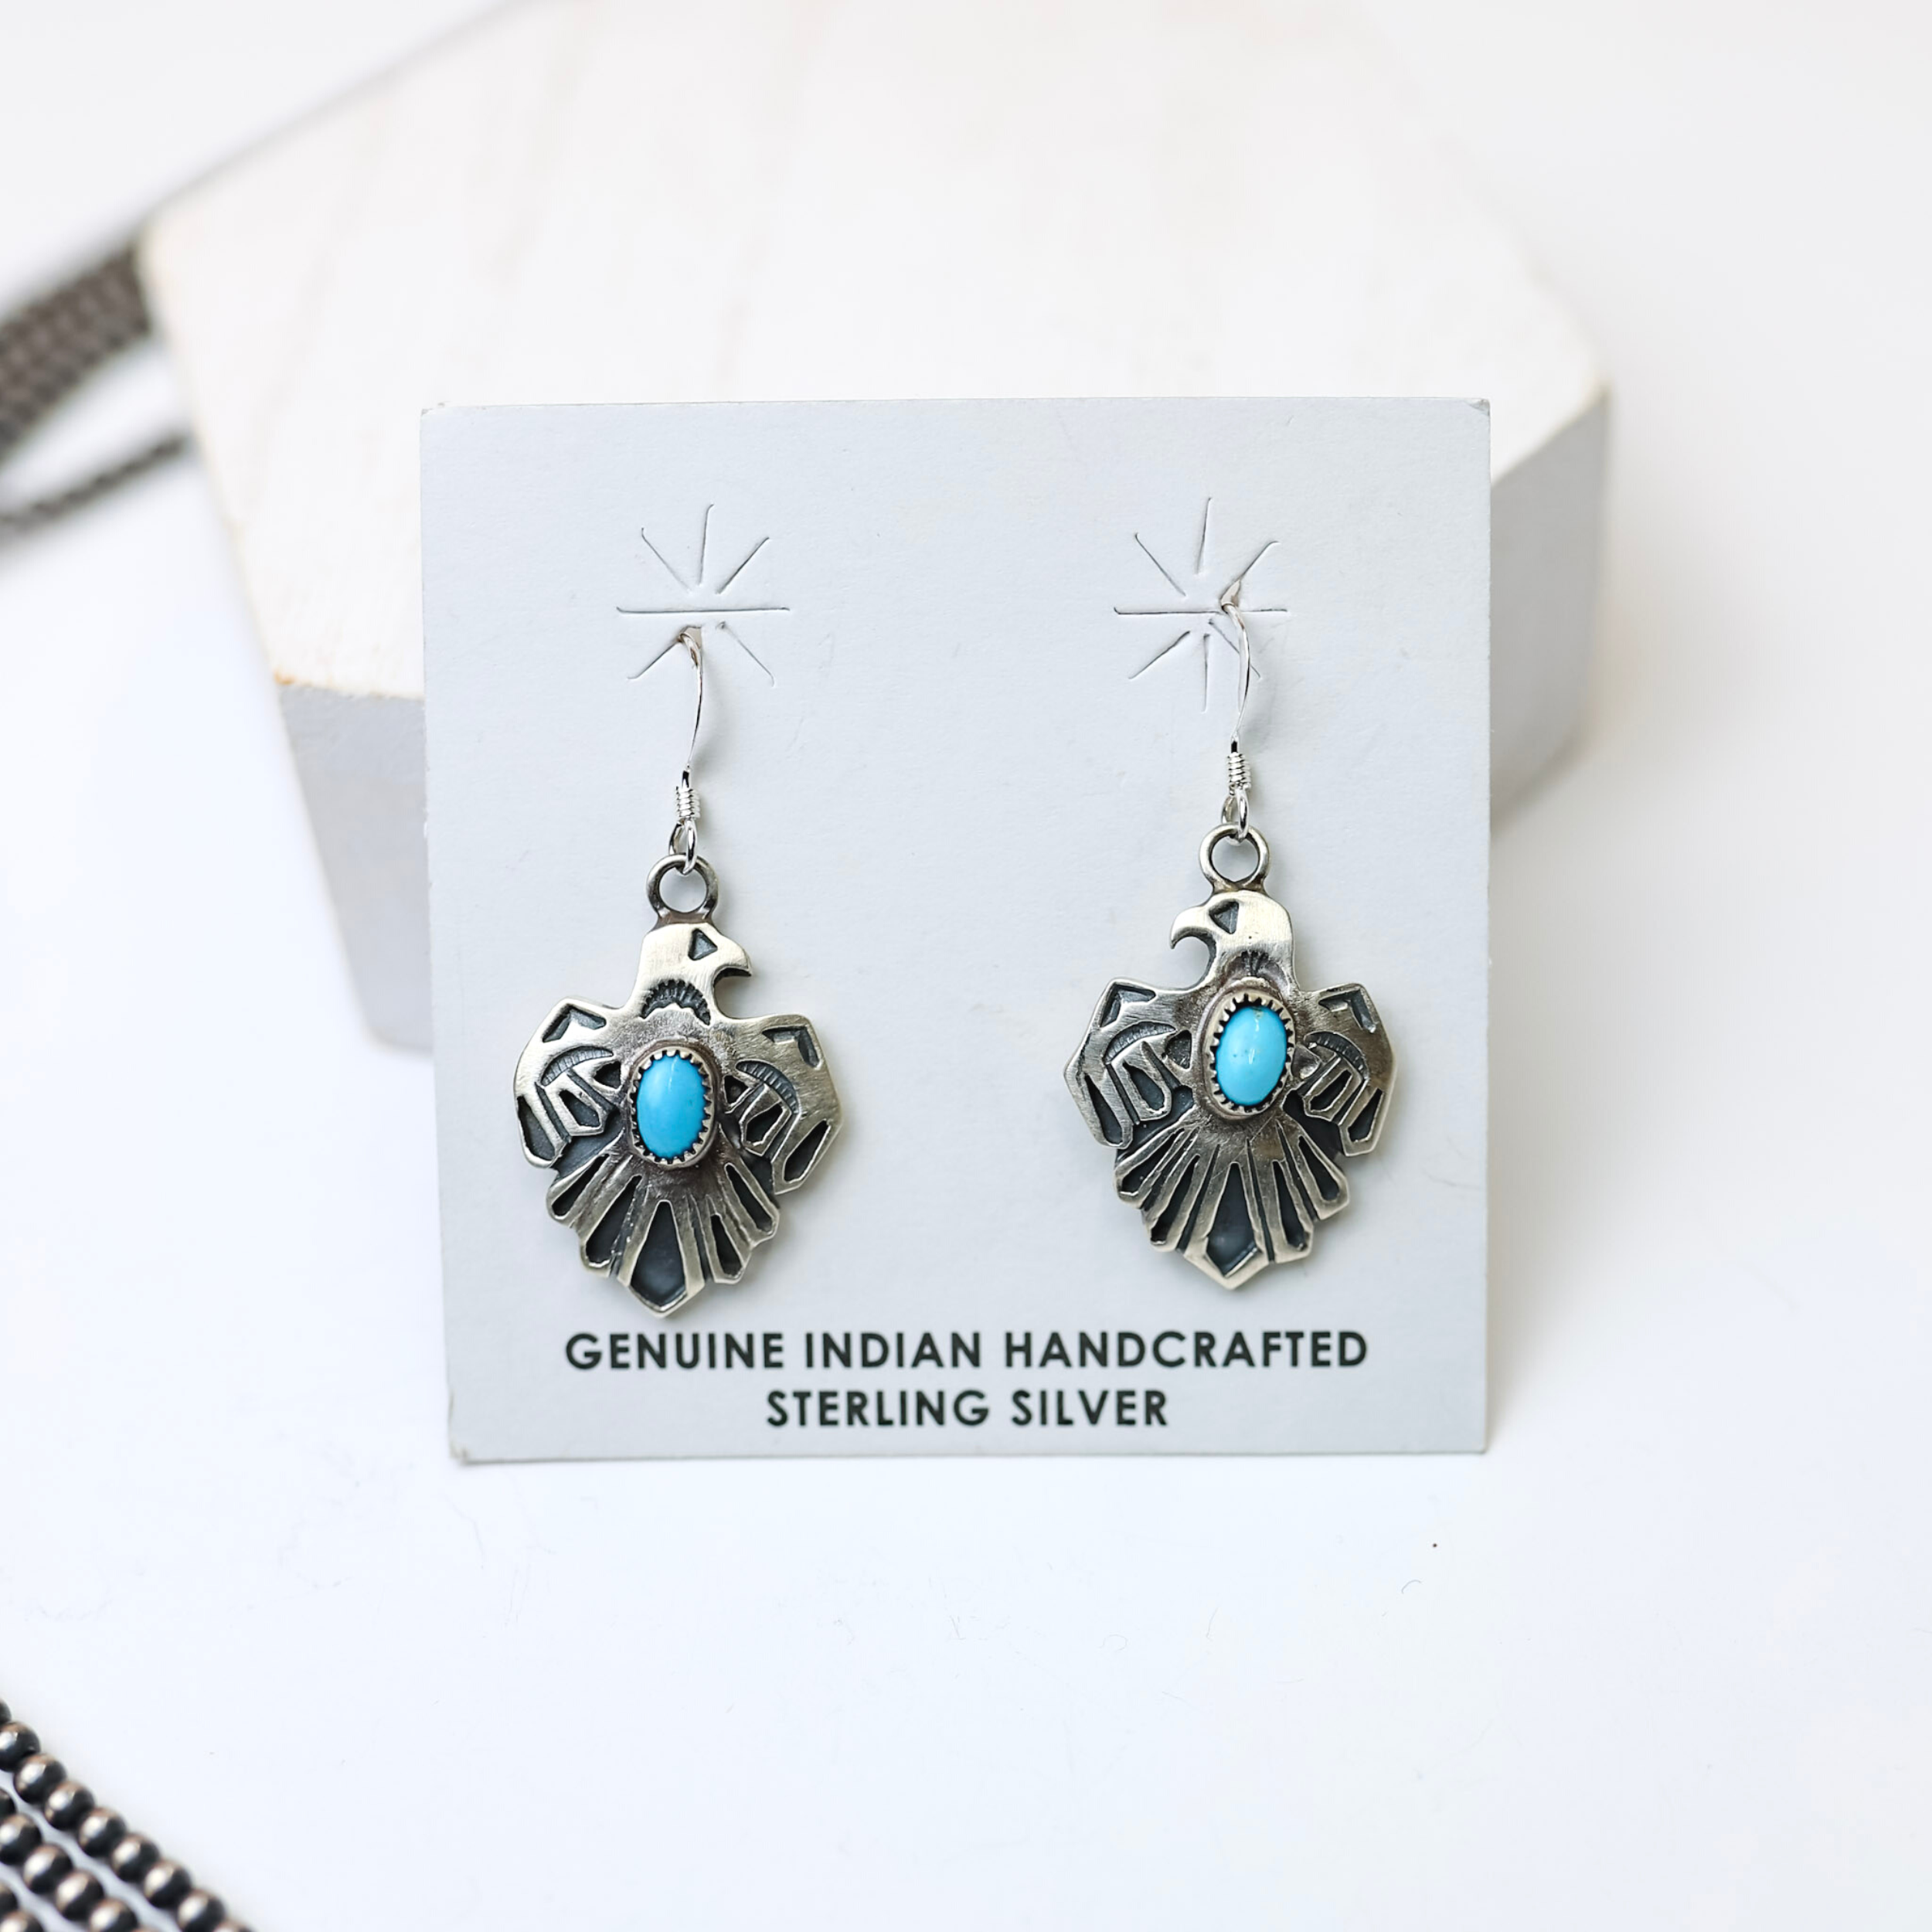 Roberta Begay Navajo Handmade Small Sterling Silver Thunderbird Earrings with Turquoise Stones is centered in the picture, with navajo pearls to the left of the earrings. All on a white background. 